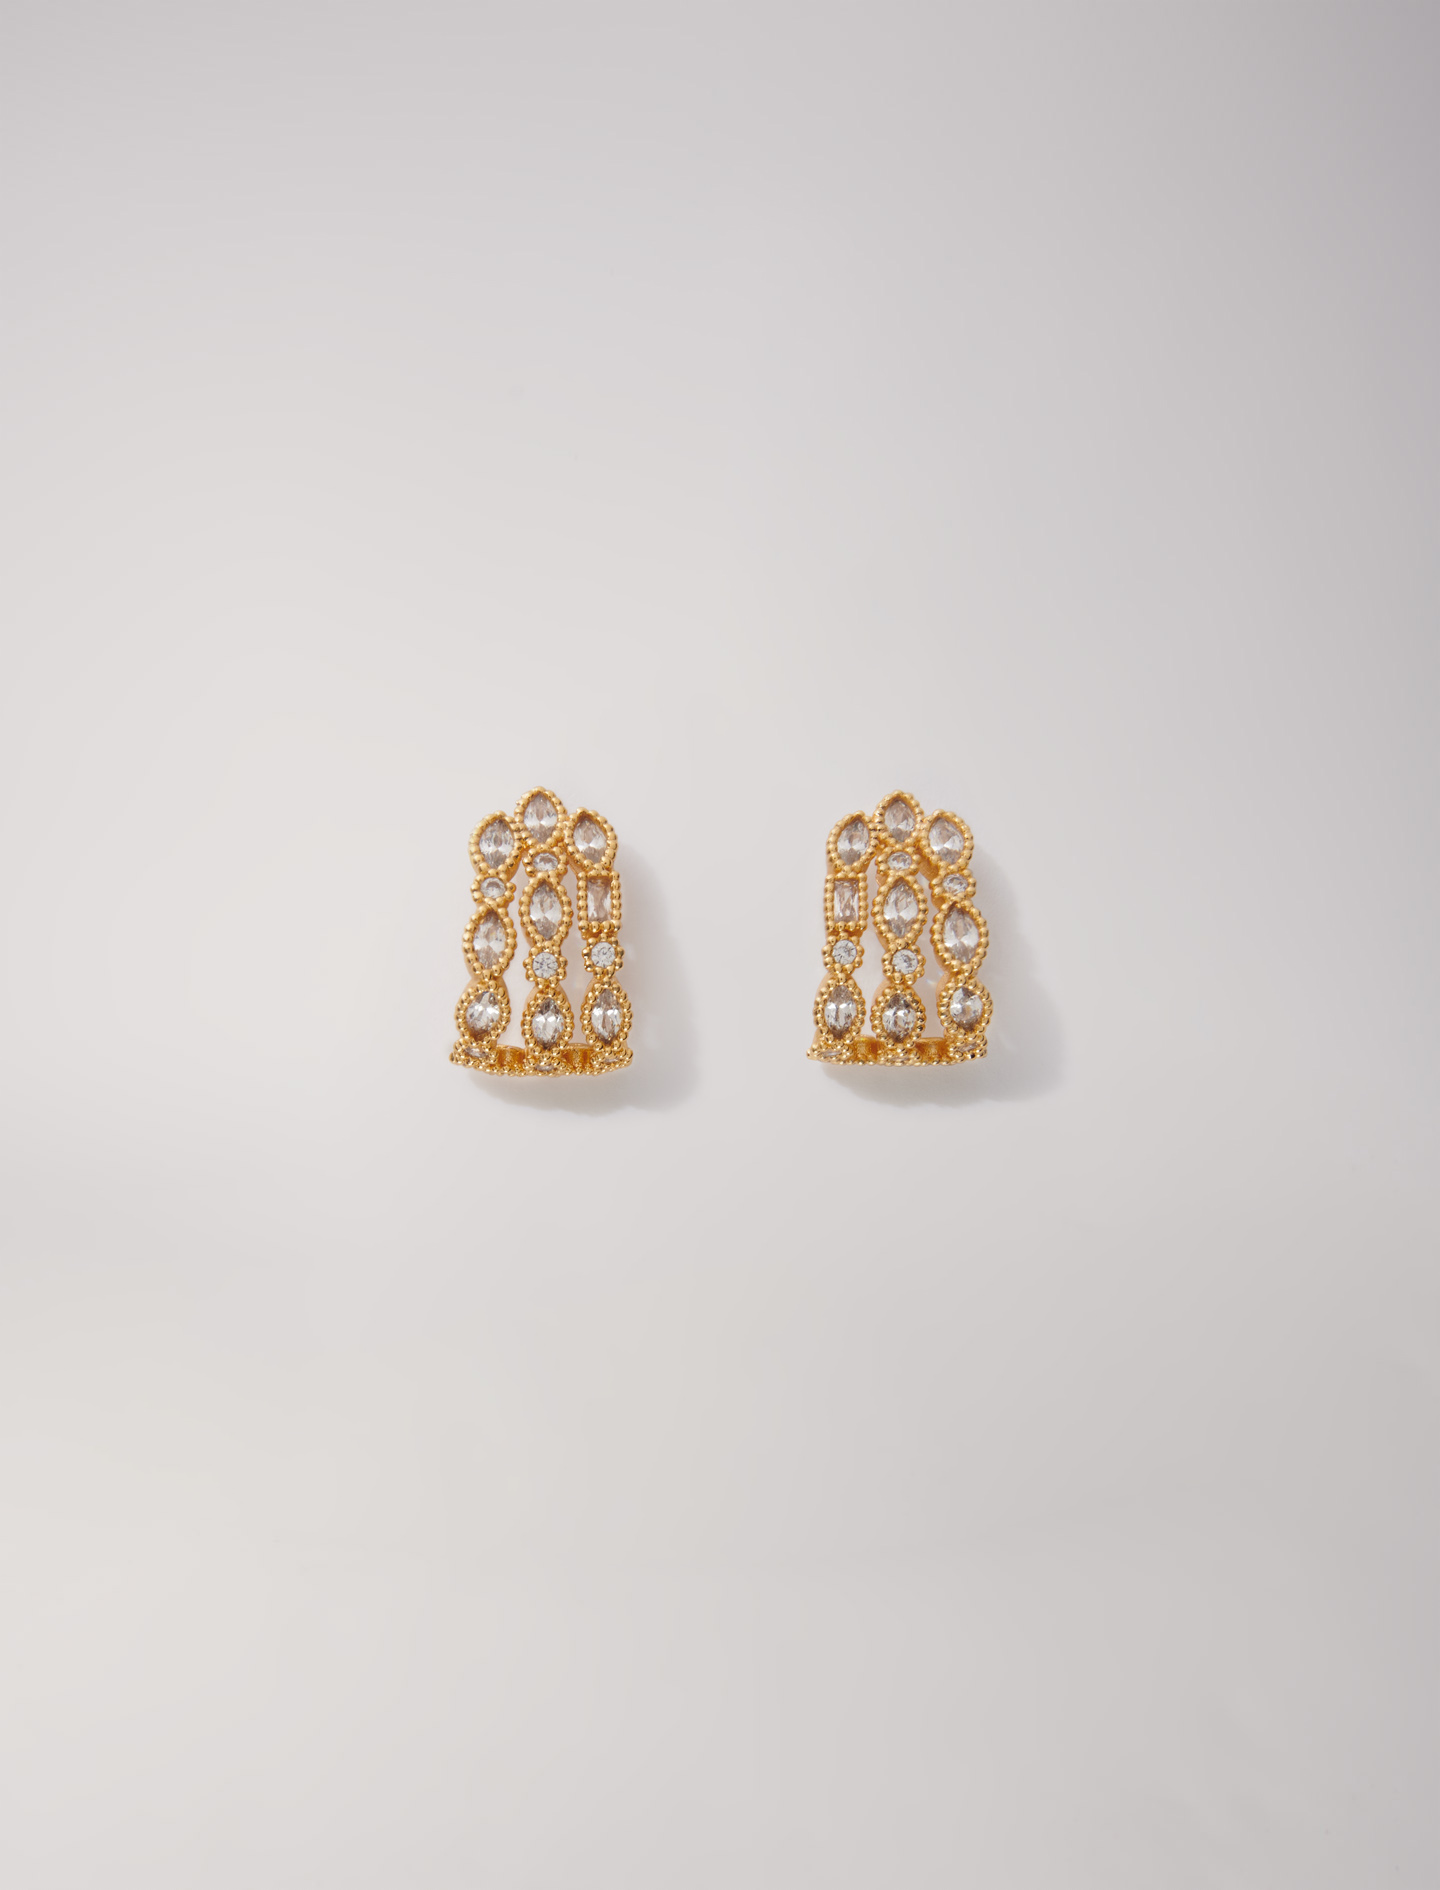 Woman's zirconium oxide Jewellery: Rhinestone earrings for Spring/Summer, size Woman-Jewelry-OS (ONE SIZE), in color Gold / Yellow